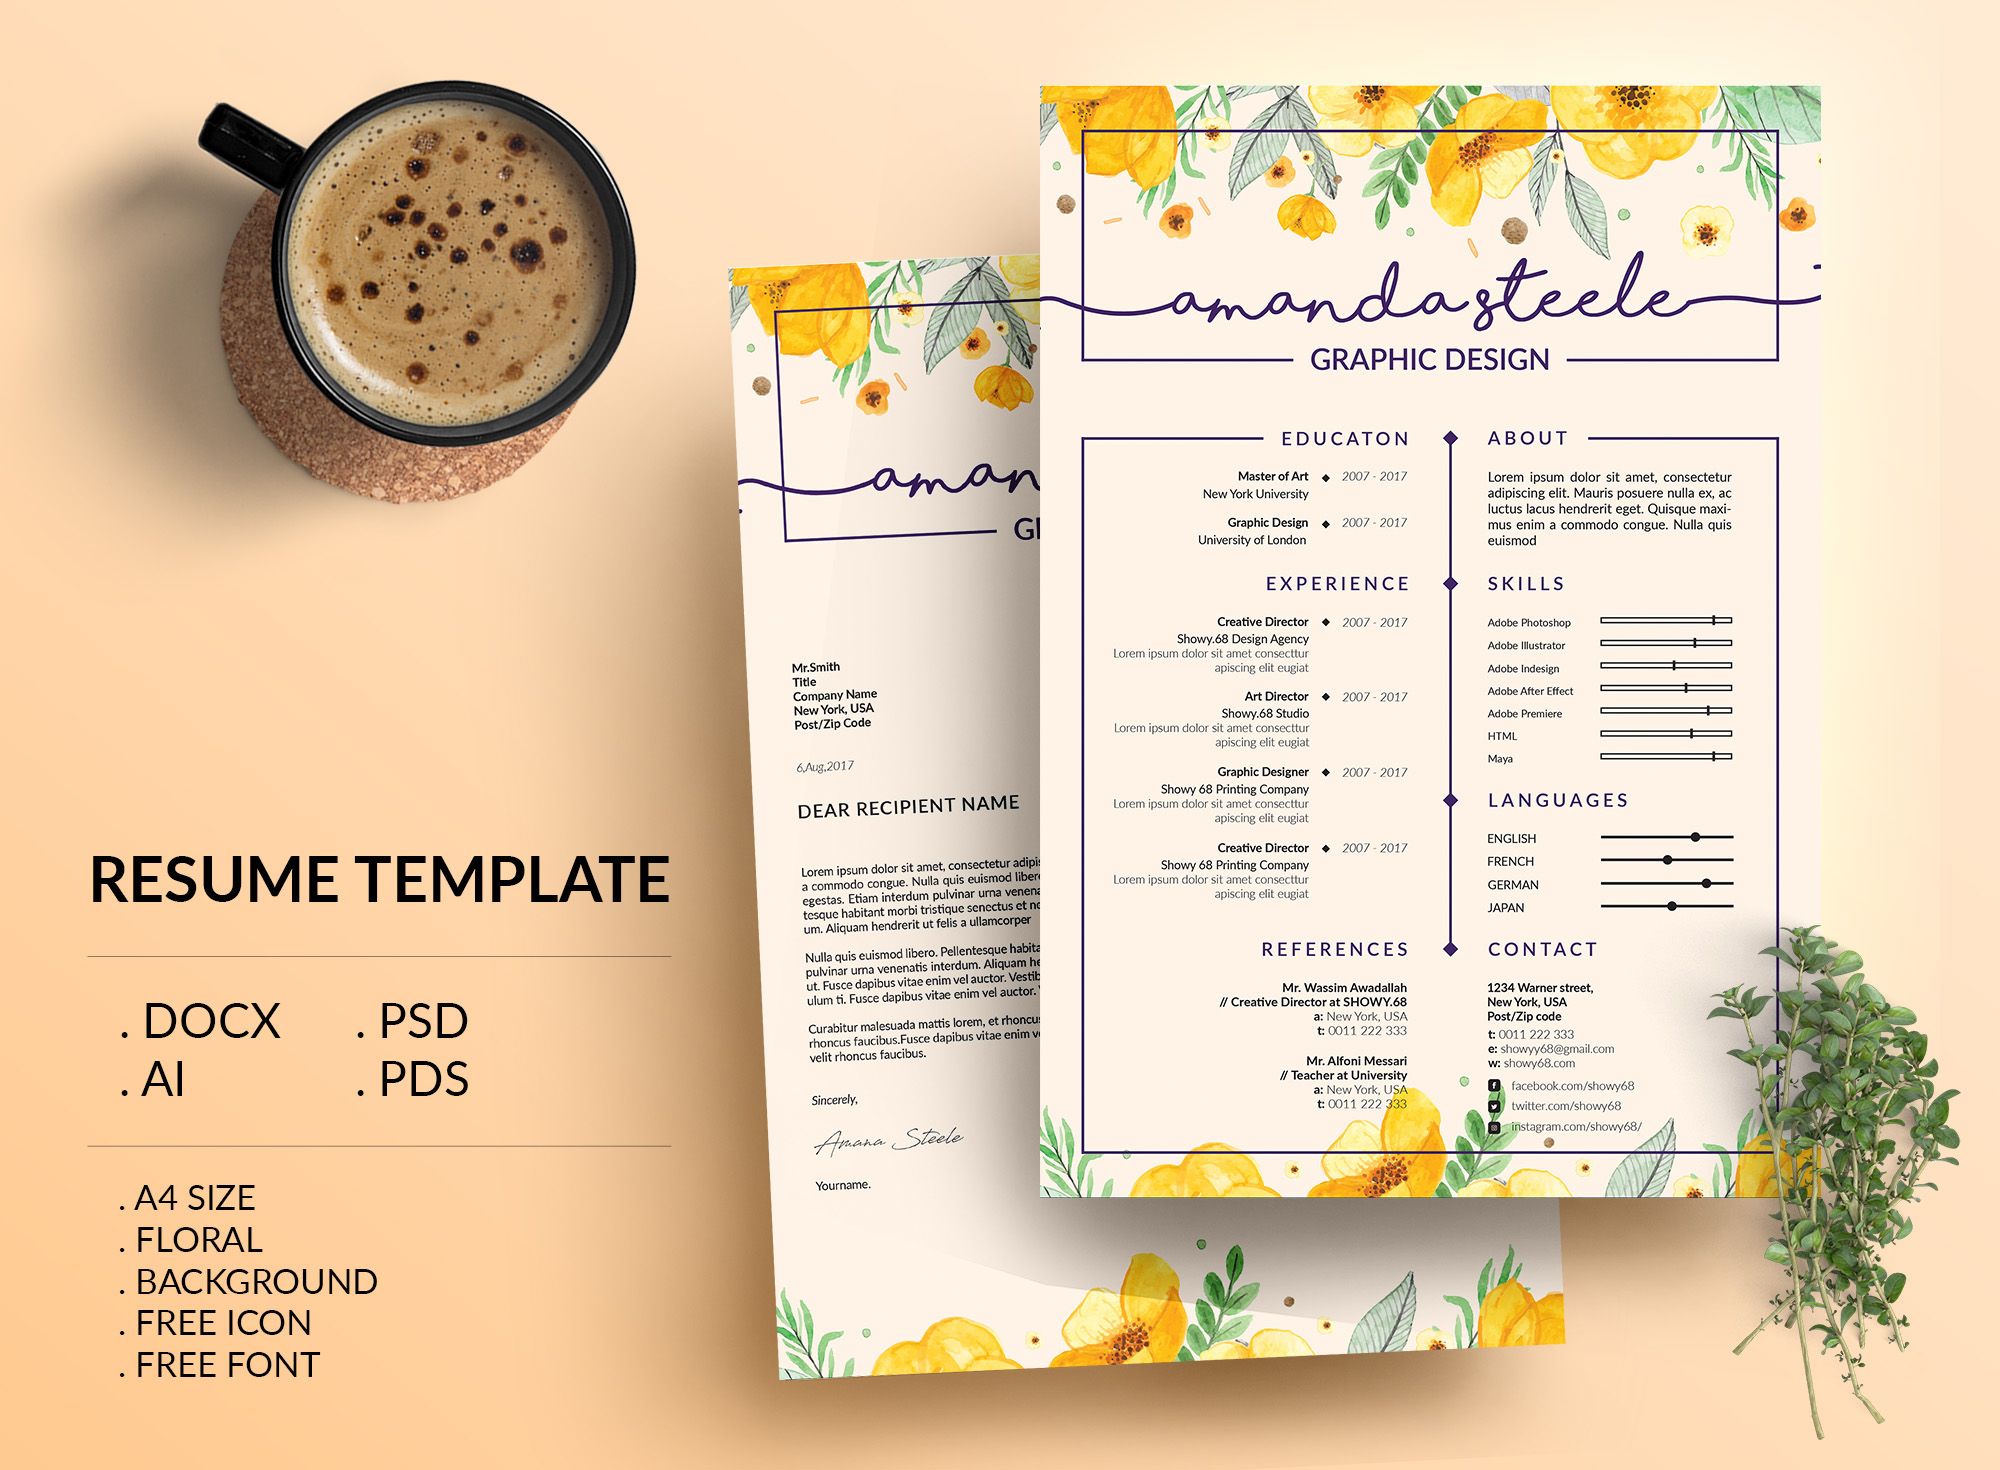 check out my behance project floral resume template cv template